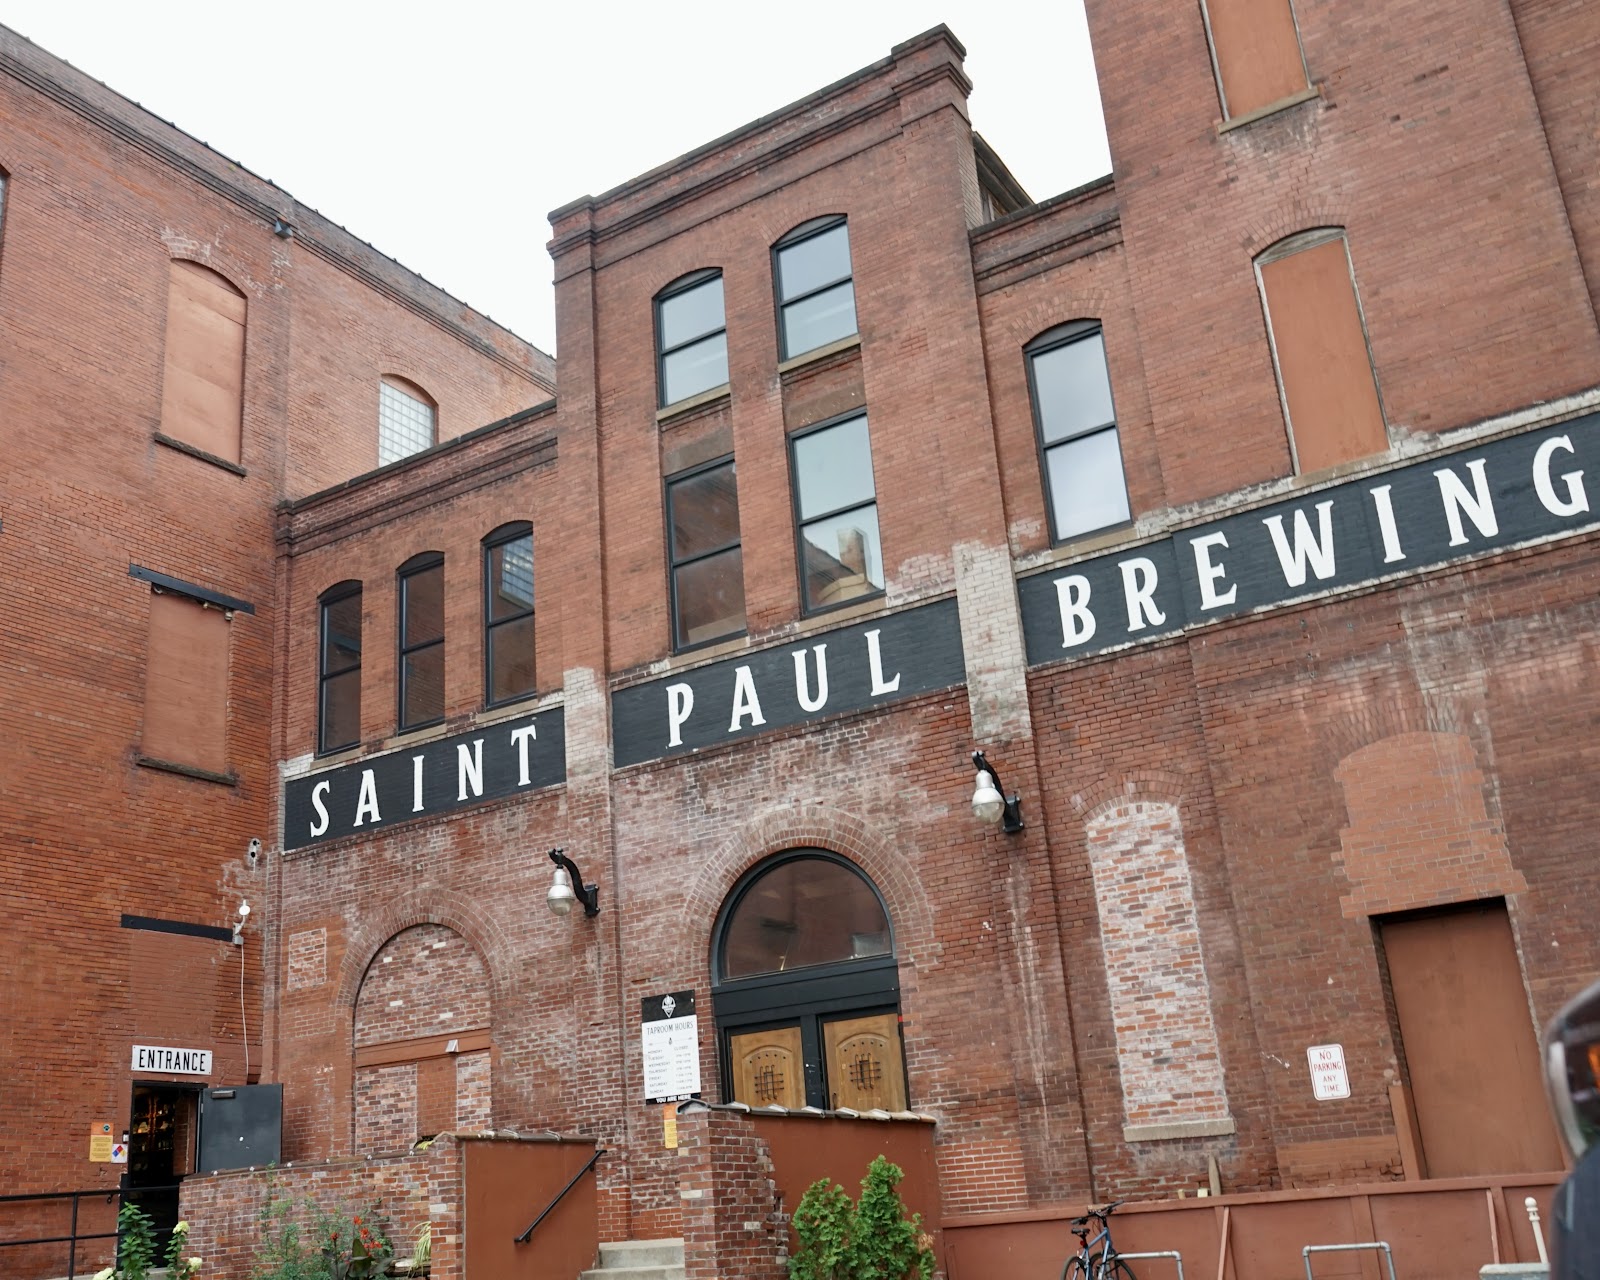 The front entrance to St Paul Brewing, built in the old Hamm's brewery